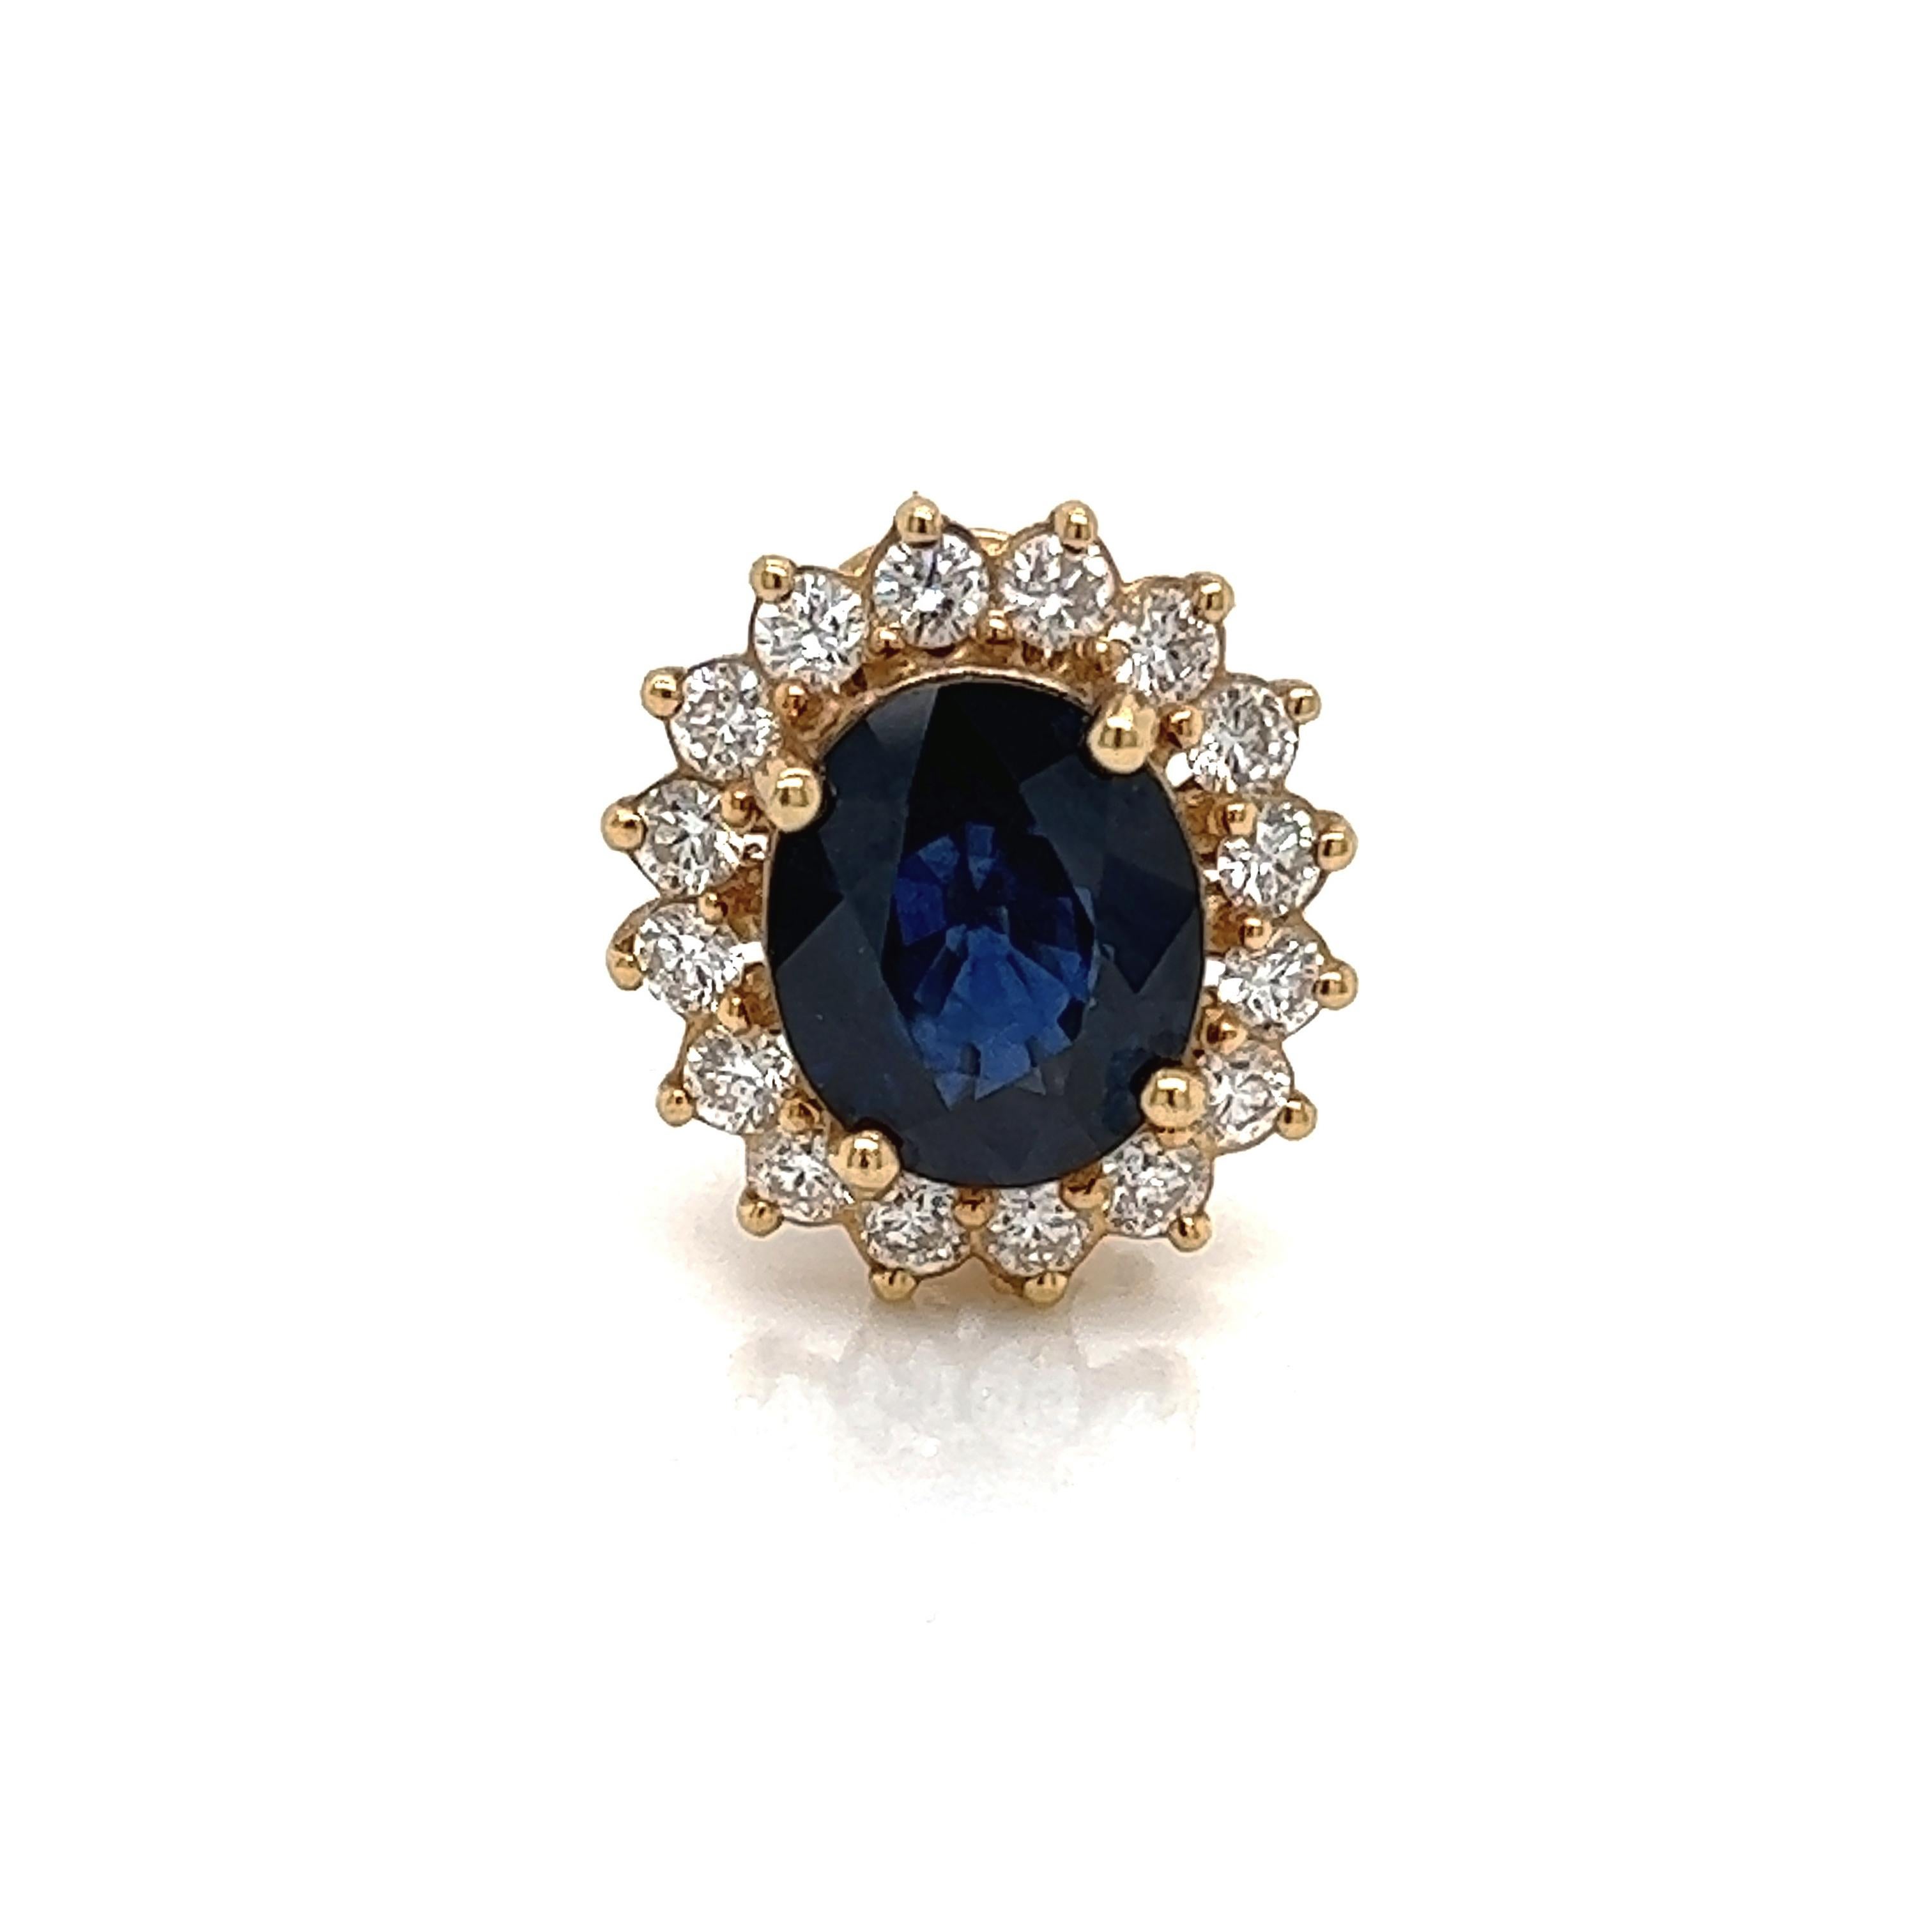 Oval Cut 10.63 Total Carat Victorian Style Sapphire and Diamond Earrings in 18K Gold For Sale